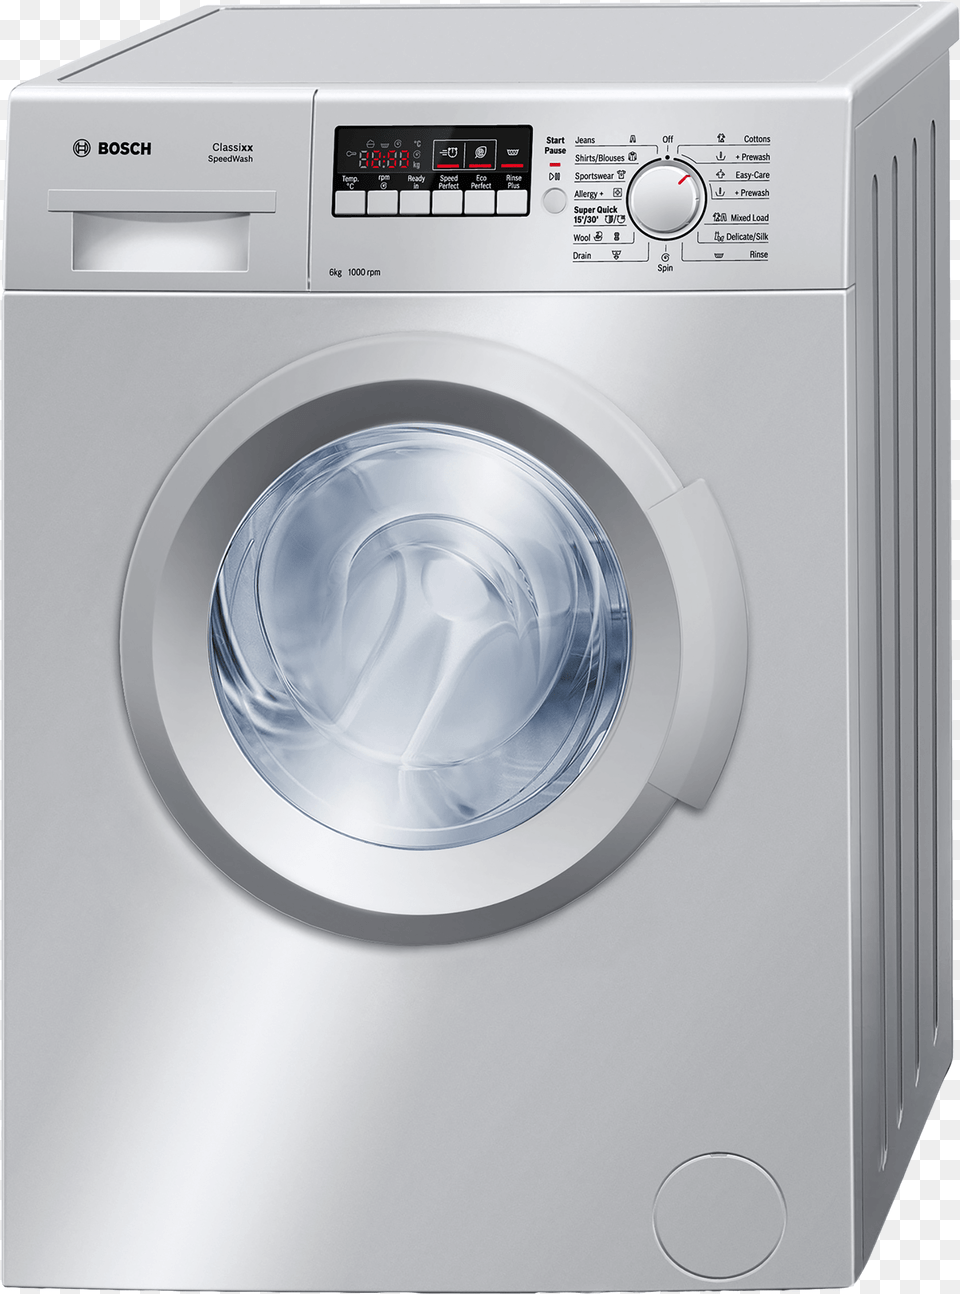 Bosch Front Loader Washing Machine Model Bosch Classixx 6 Varioperfect Manual, Appliance, Device, Electrical Device, Washer Free Png Download